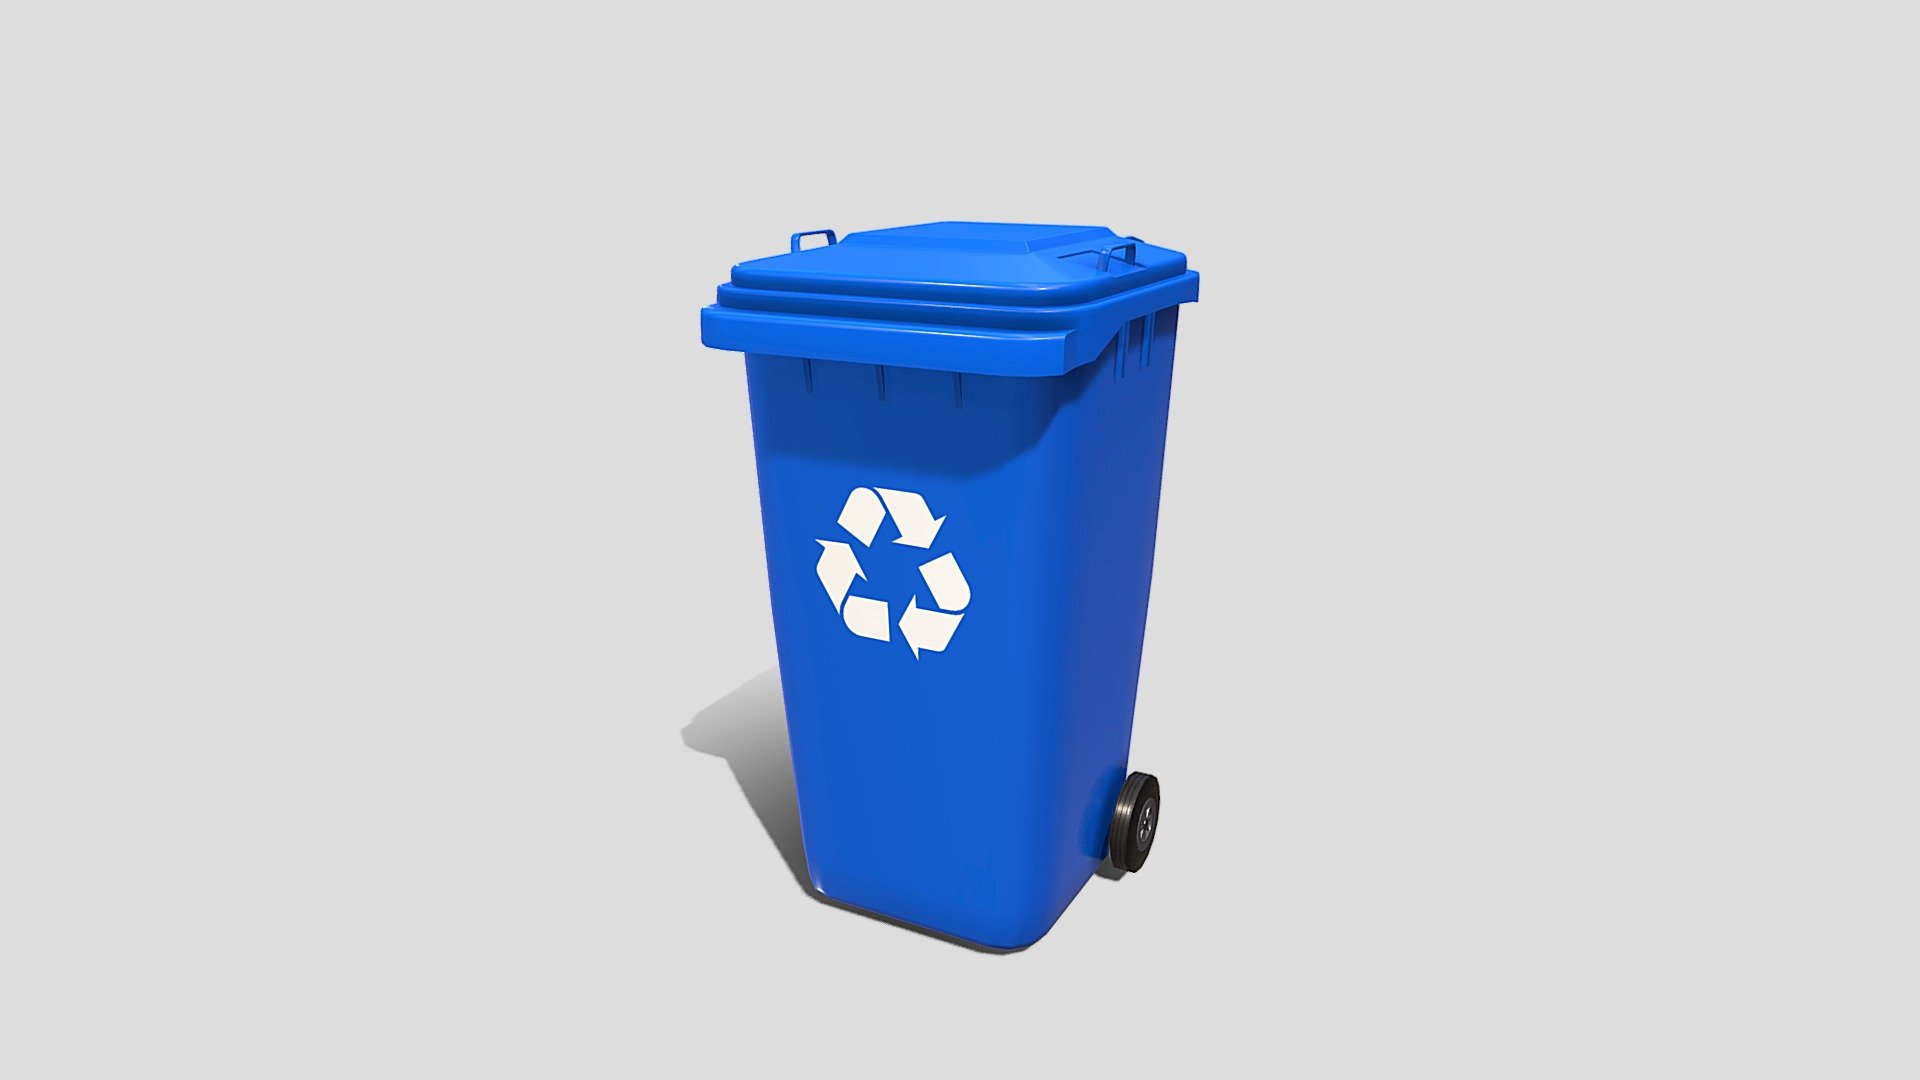 Trash can 3d model rendered with Cycles in Blender, as per seen on attached images. 

File formats:
-.blend, rendered with cycles, as seen in the images;
-.obj, with materials applied;
-.dae, with materials applied;
-.fbx, with materials applied;
-.stl;

Files come named appropriately and split by file format.

3D Software:
The 3D model was originally created in Blender 3.1 and rendered with Cycles.

Materials and textures:
The models have materials applied in all formats, and are ready to import and render.
Materials are image based using PBR, the model comes with four 4k png image textures.

Preview scenes:
The preview images are rendered in Blender using its built-in render engine &lsquo;Cycles'.
Note that the blend files come directly with the rendering scene included and the render command will generate the exact result as seen in previews.

General:
The models are built mostly out of quads.

For any problems please feel free to contact me.

Don't forget to rate and enjoy! - Trash can v14 - Buy Royalty Free 3D model by dragosburian 3d model